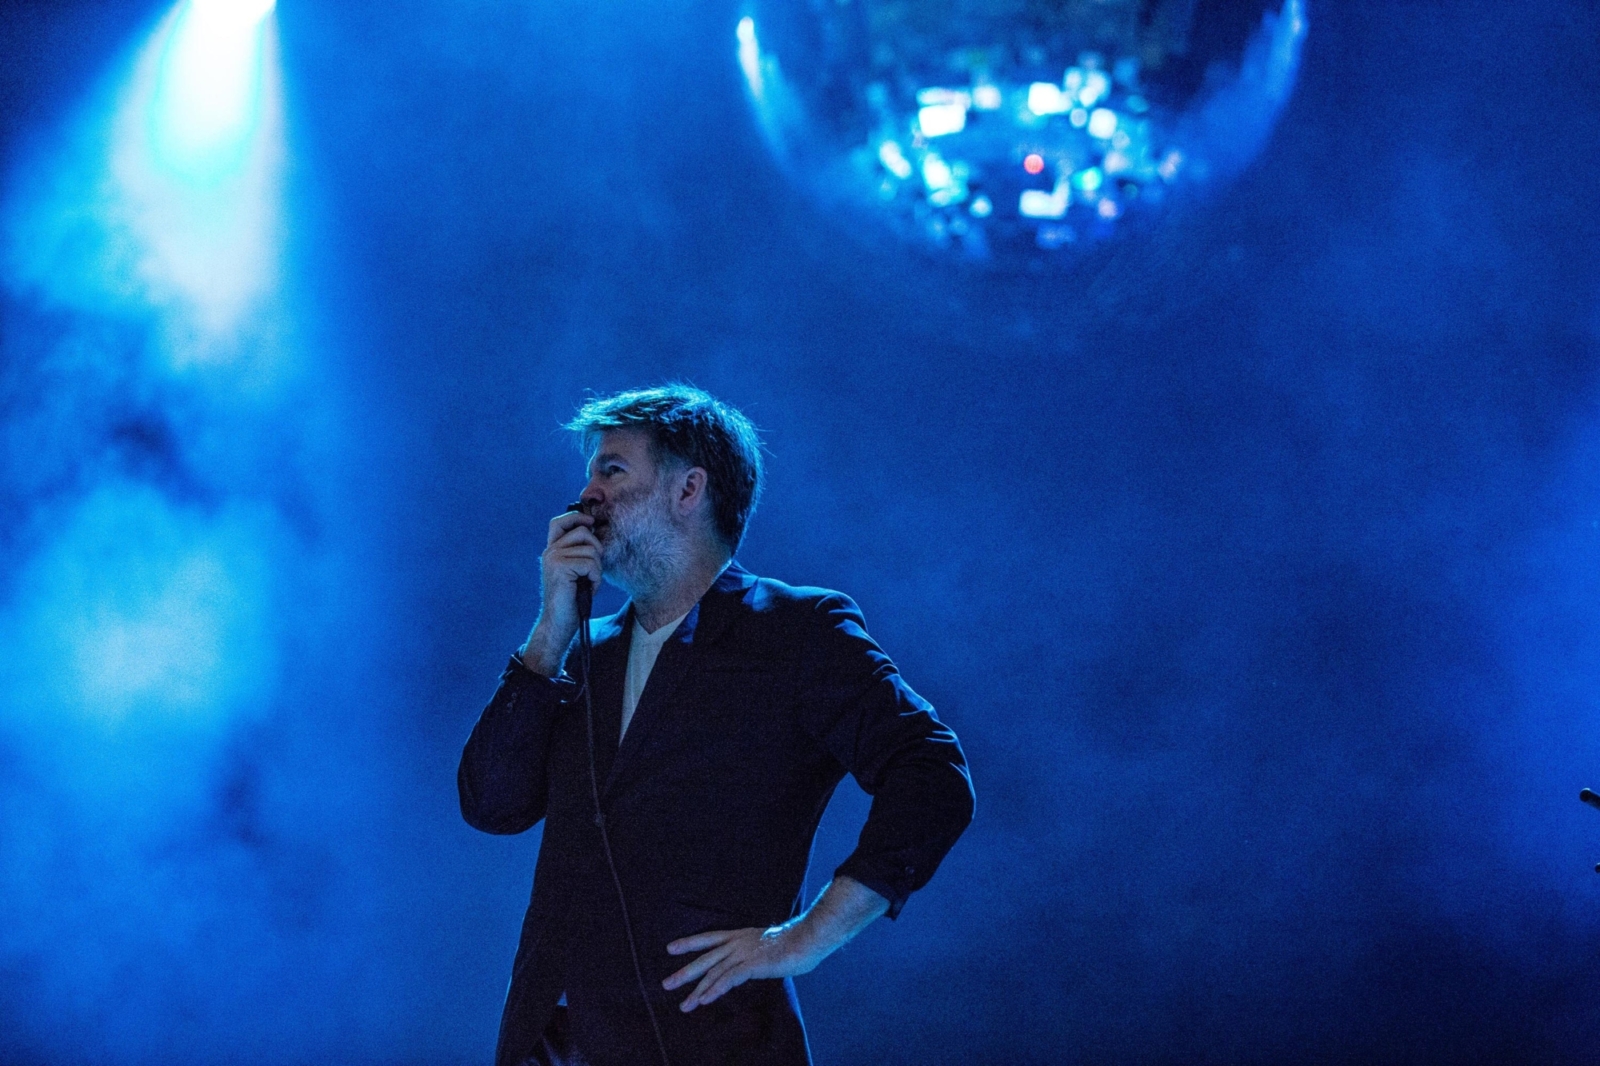 LCD Soundsystem announce residency at London's O2 Academy Brixton